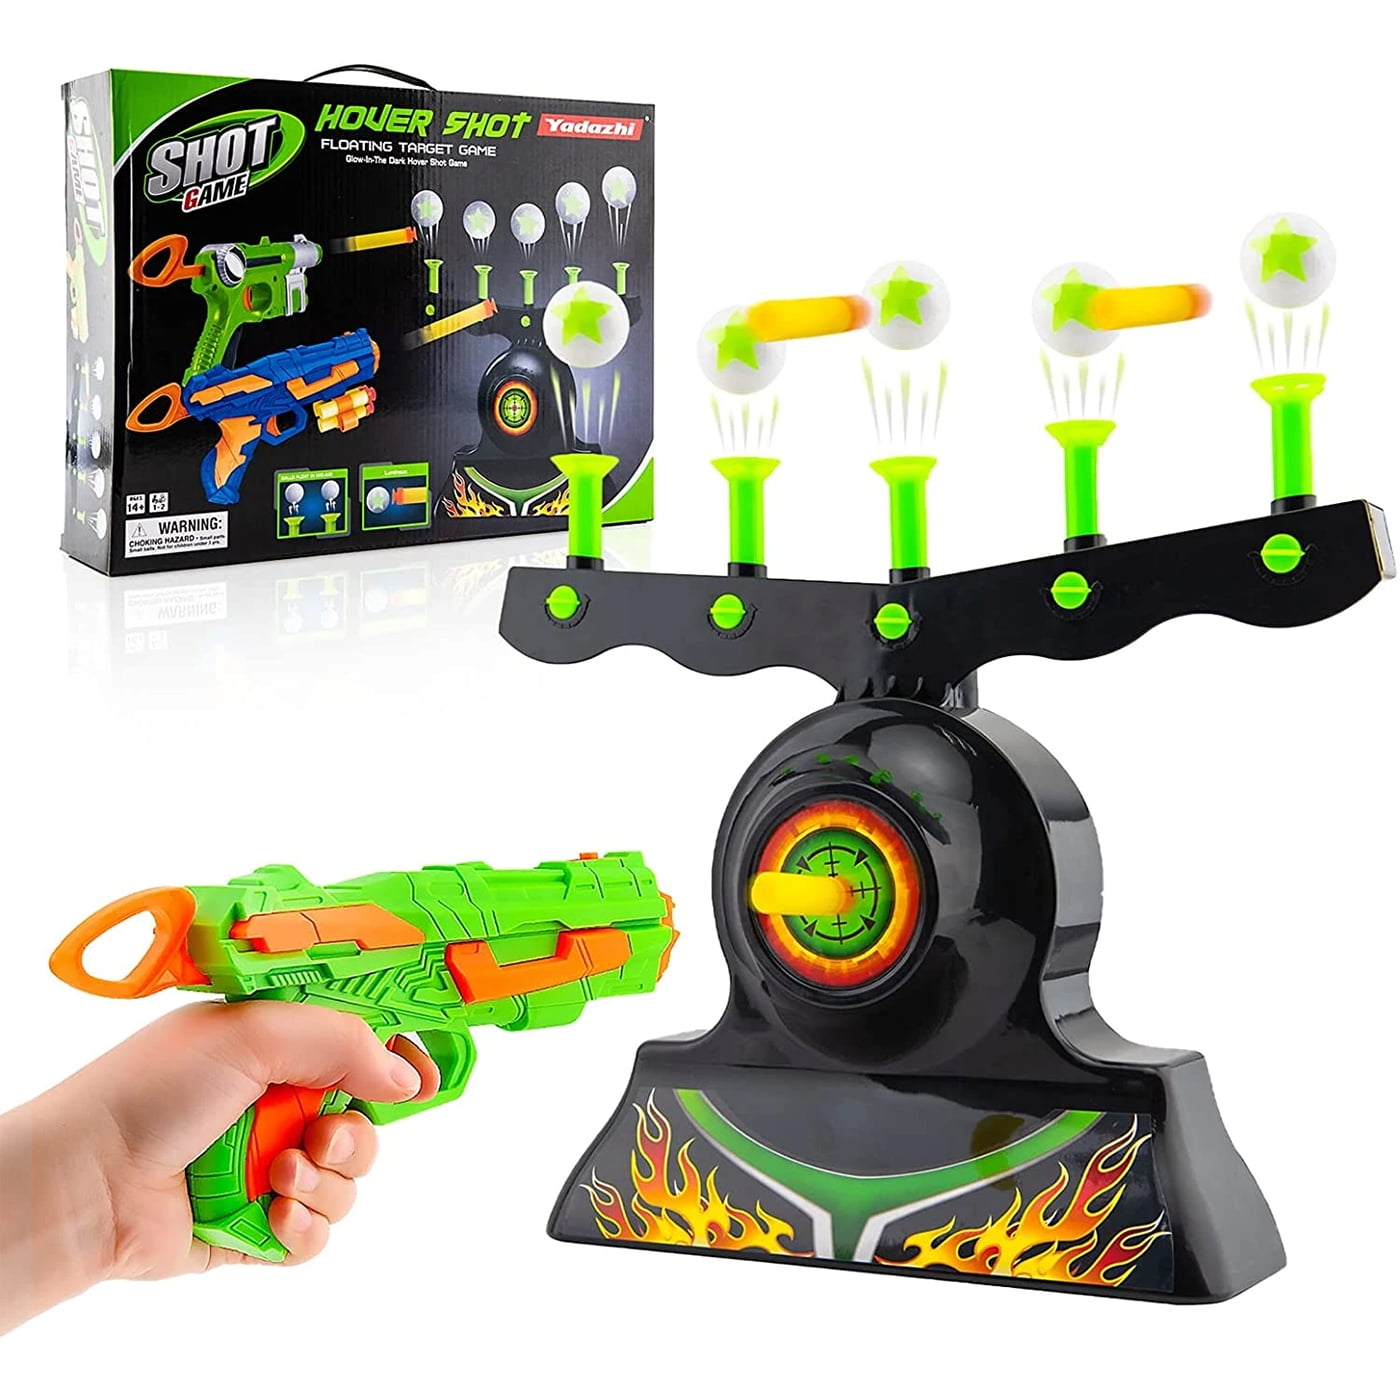 Shooting Targets for Nerf Guns Shooting Game Glow in The Dark Floating Ball  Target Practice Toys for Kids Boys Hover Shot 1 Blaster Toy Gun 10 Soft